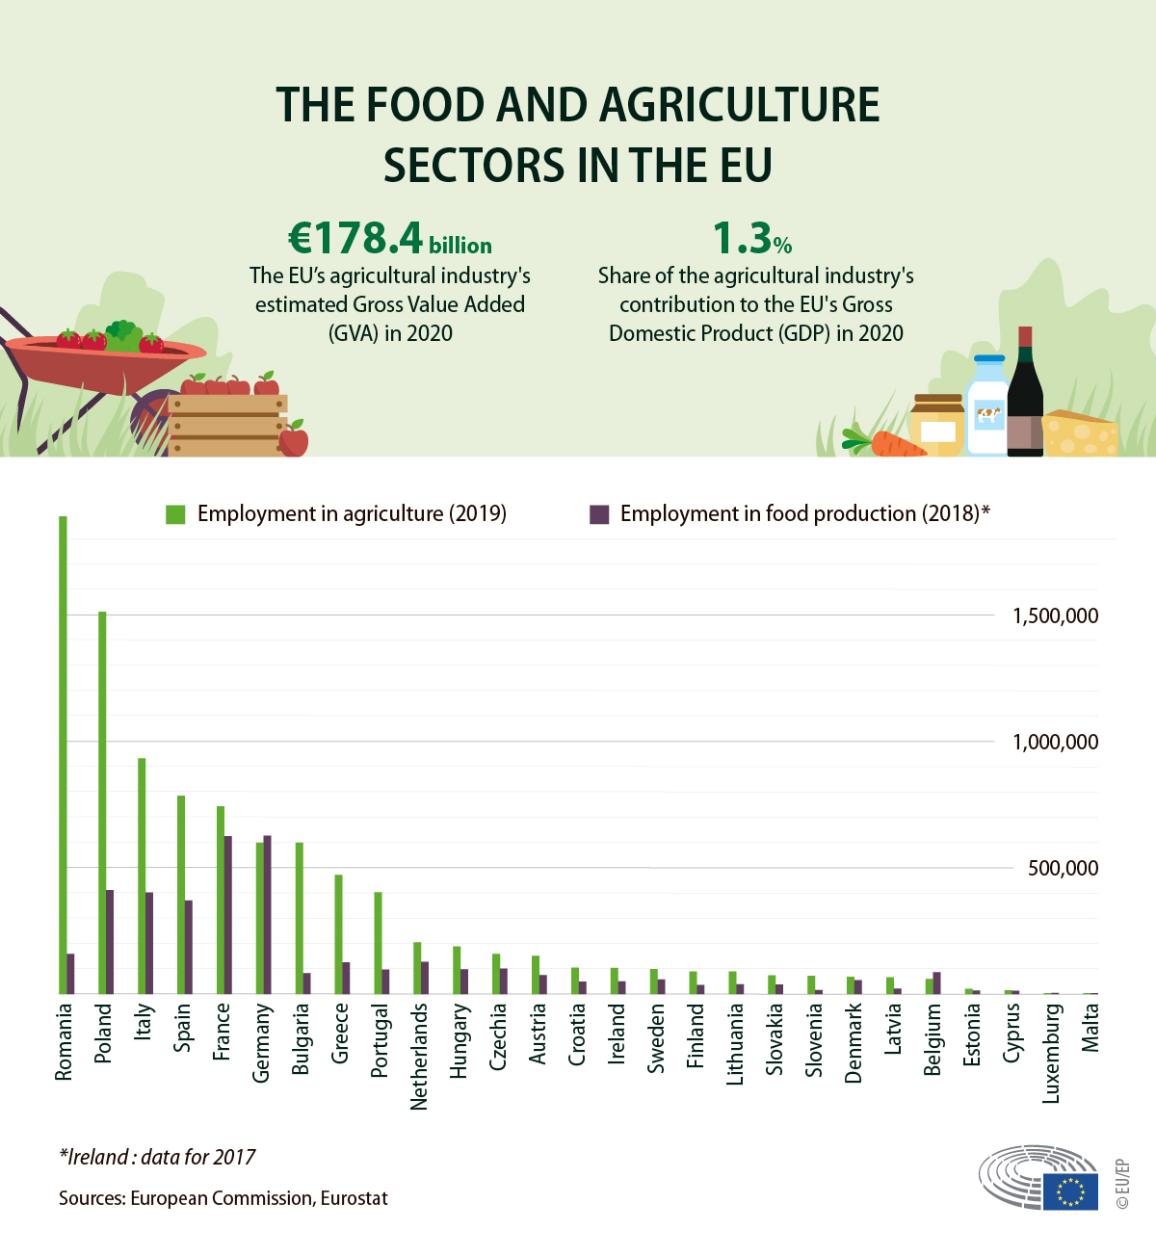 Infographic showing the employment in agriculture (in 2019) and food production (in 2018) per EU country. Key data can be found under the heading EU agriculture employment statistics.